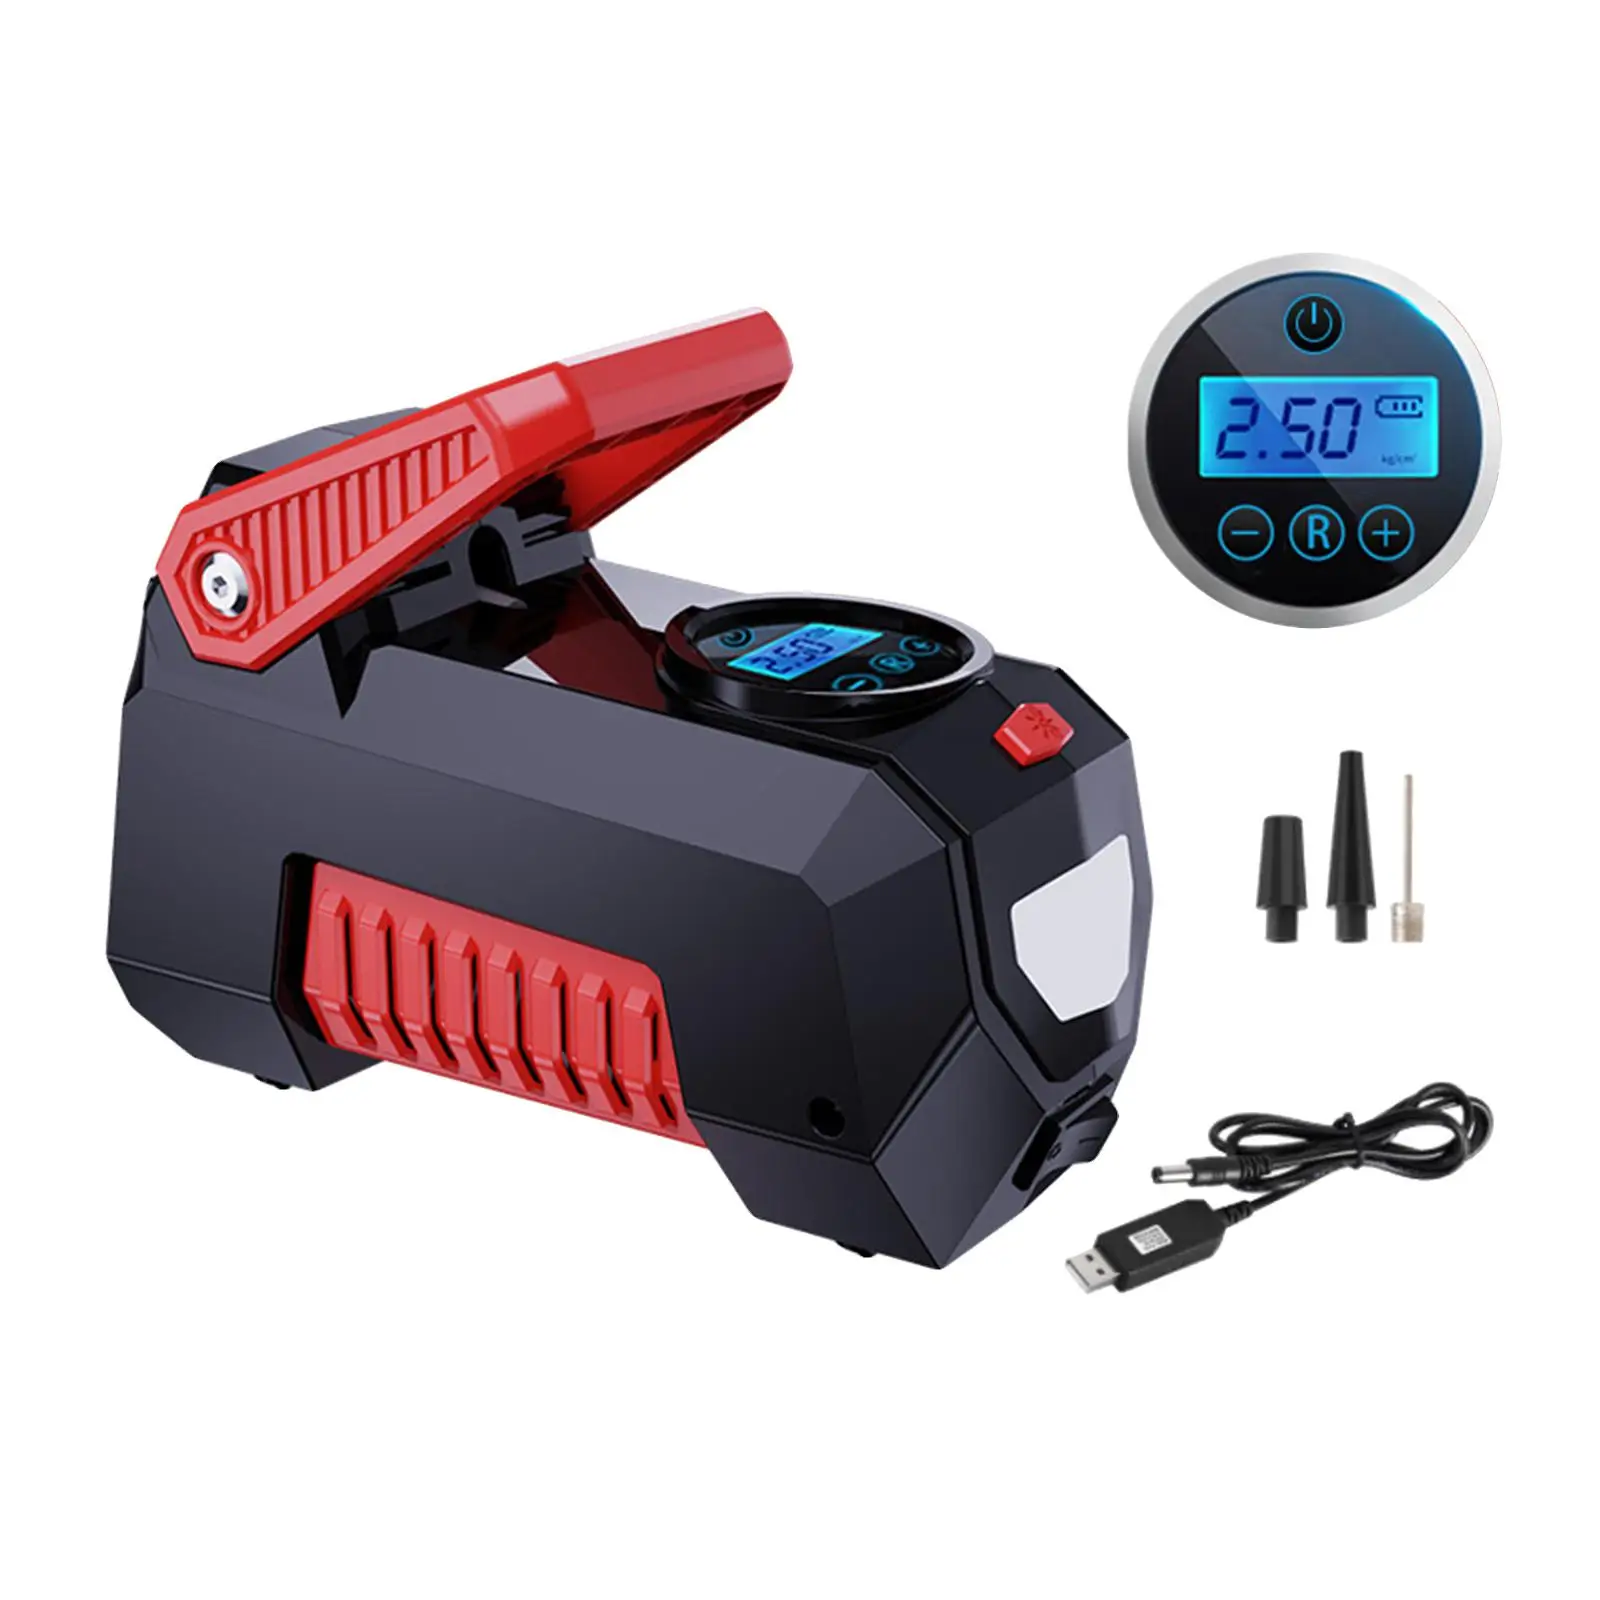 Auto Tire Pump Cordless Portable Tire Inflator for Bicycle Motorcycles Basketball